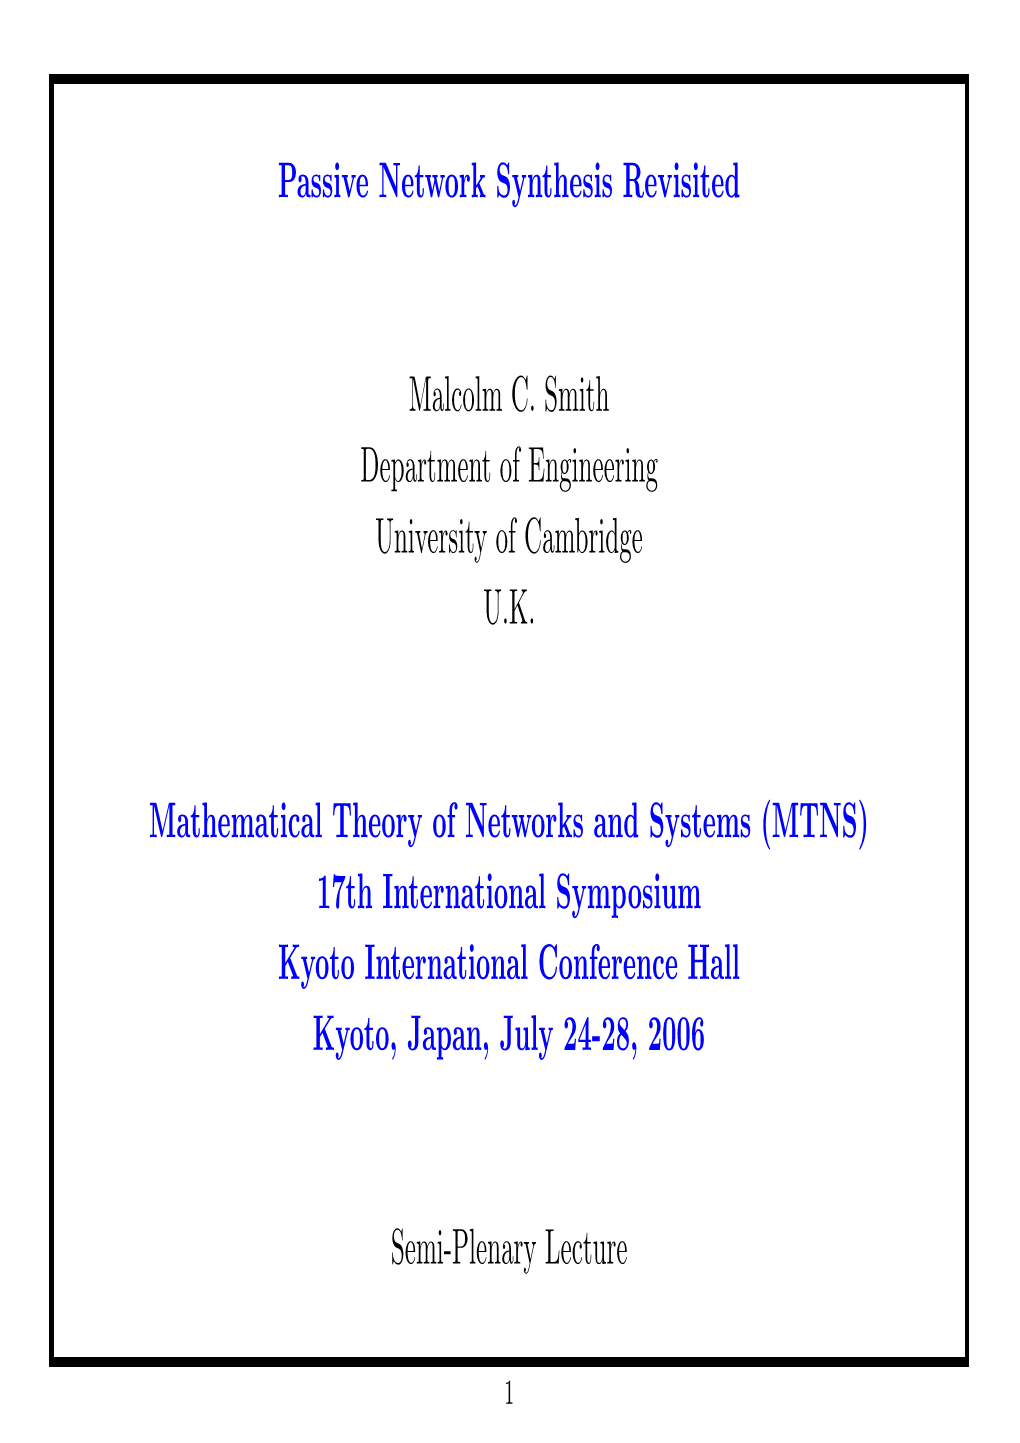 Passive Network Synthesis Revisited Malcolm C. Smith Department of Engineering University of Cambridge U.K. Mathematical Theory